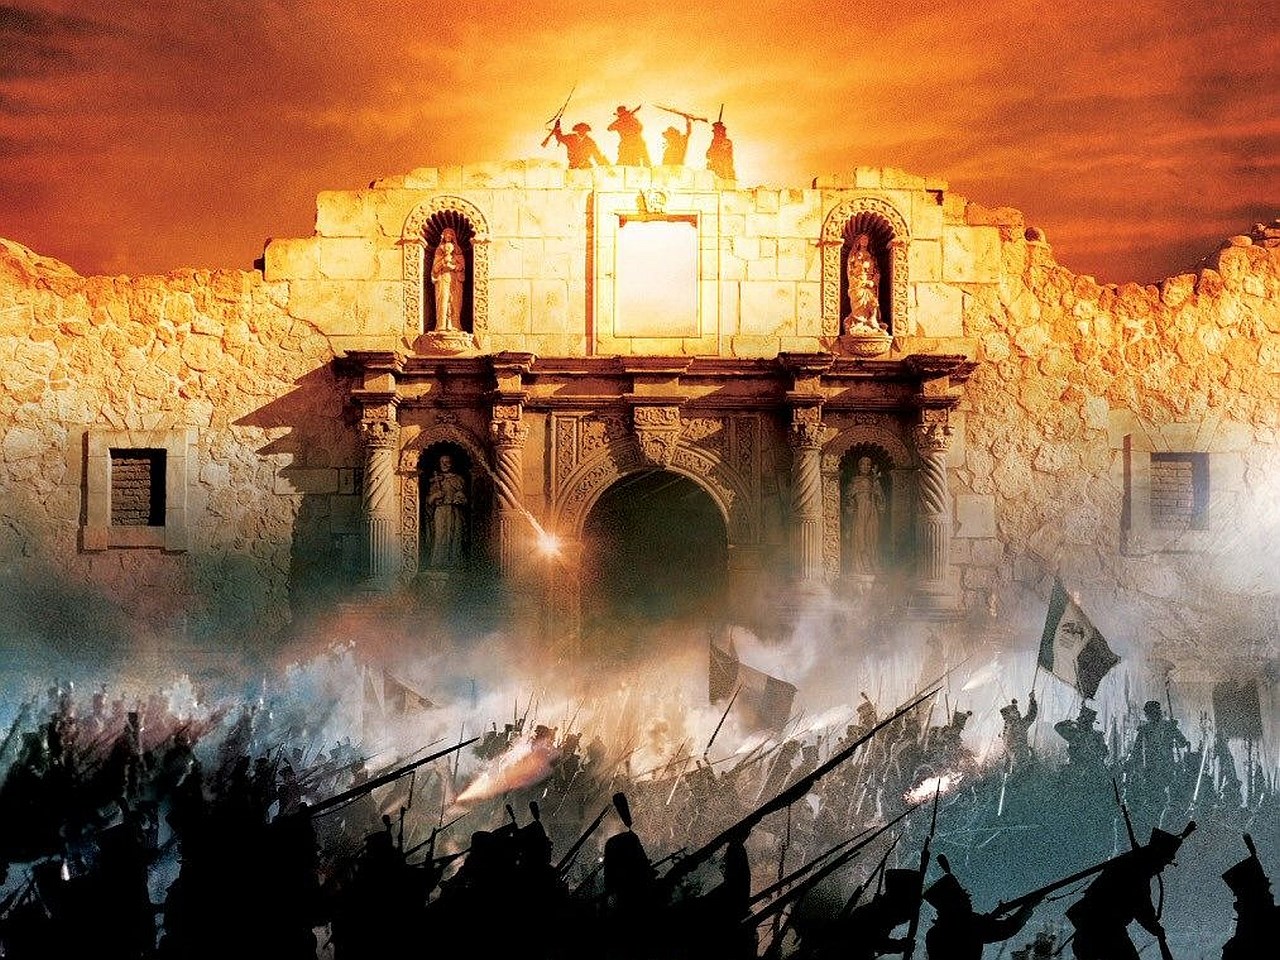 1280x960 free download picture of the alamo